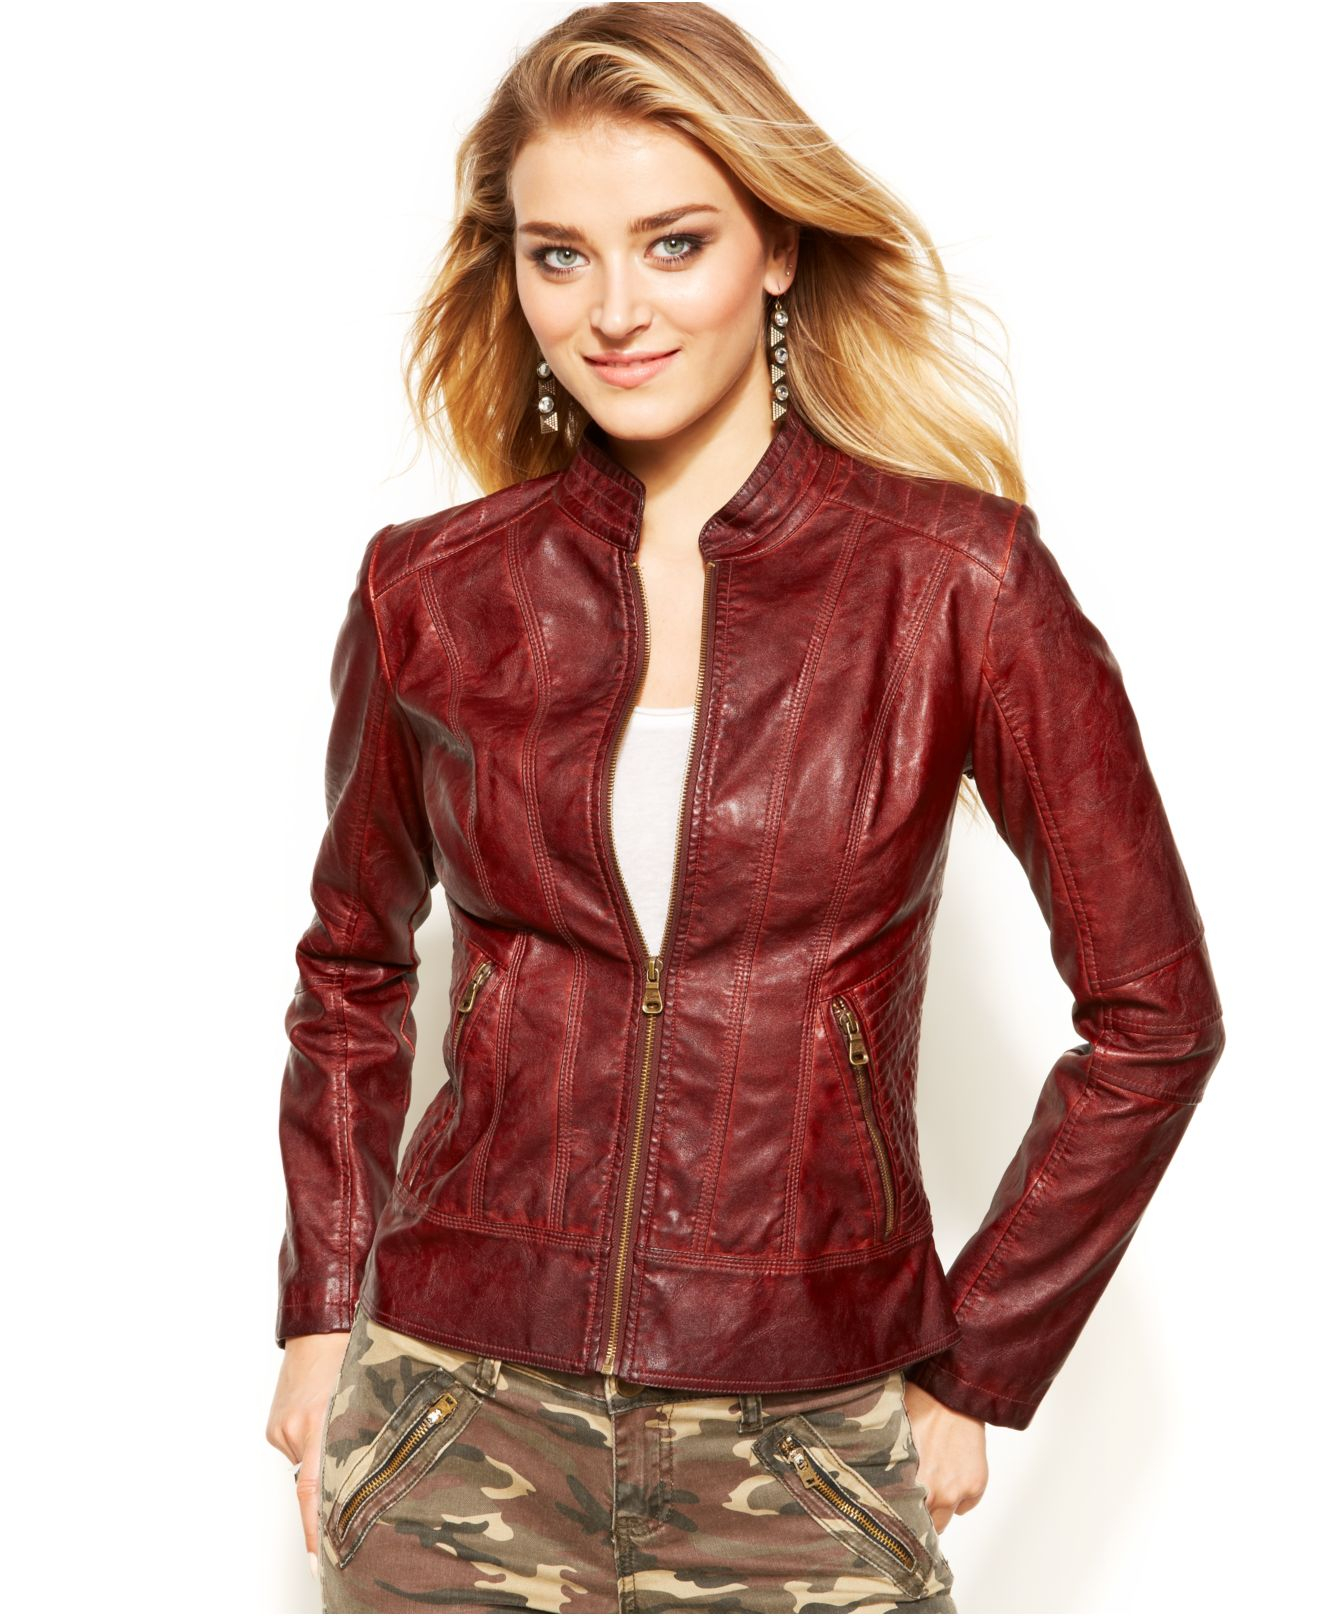 Lyst - Guess Faux-Leather Jacket in Red